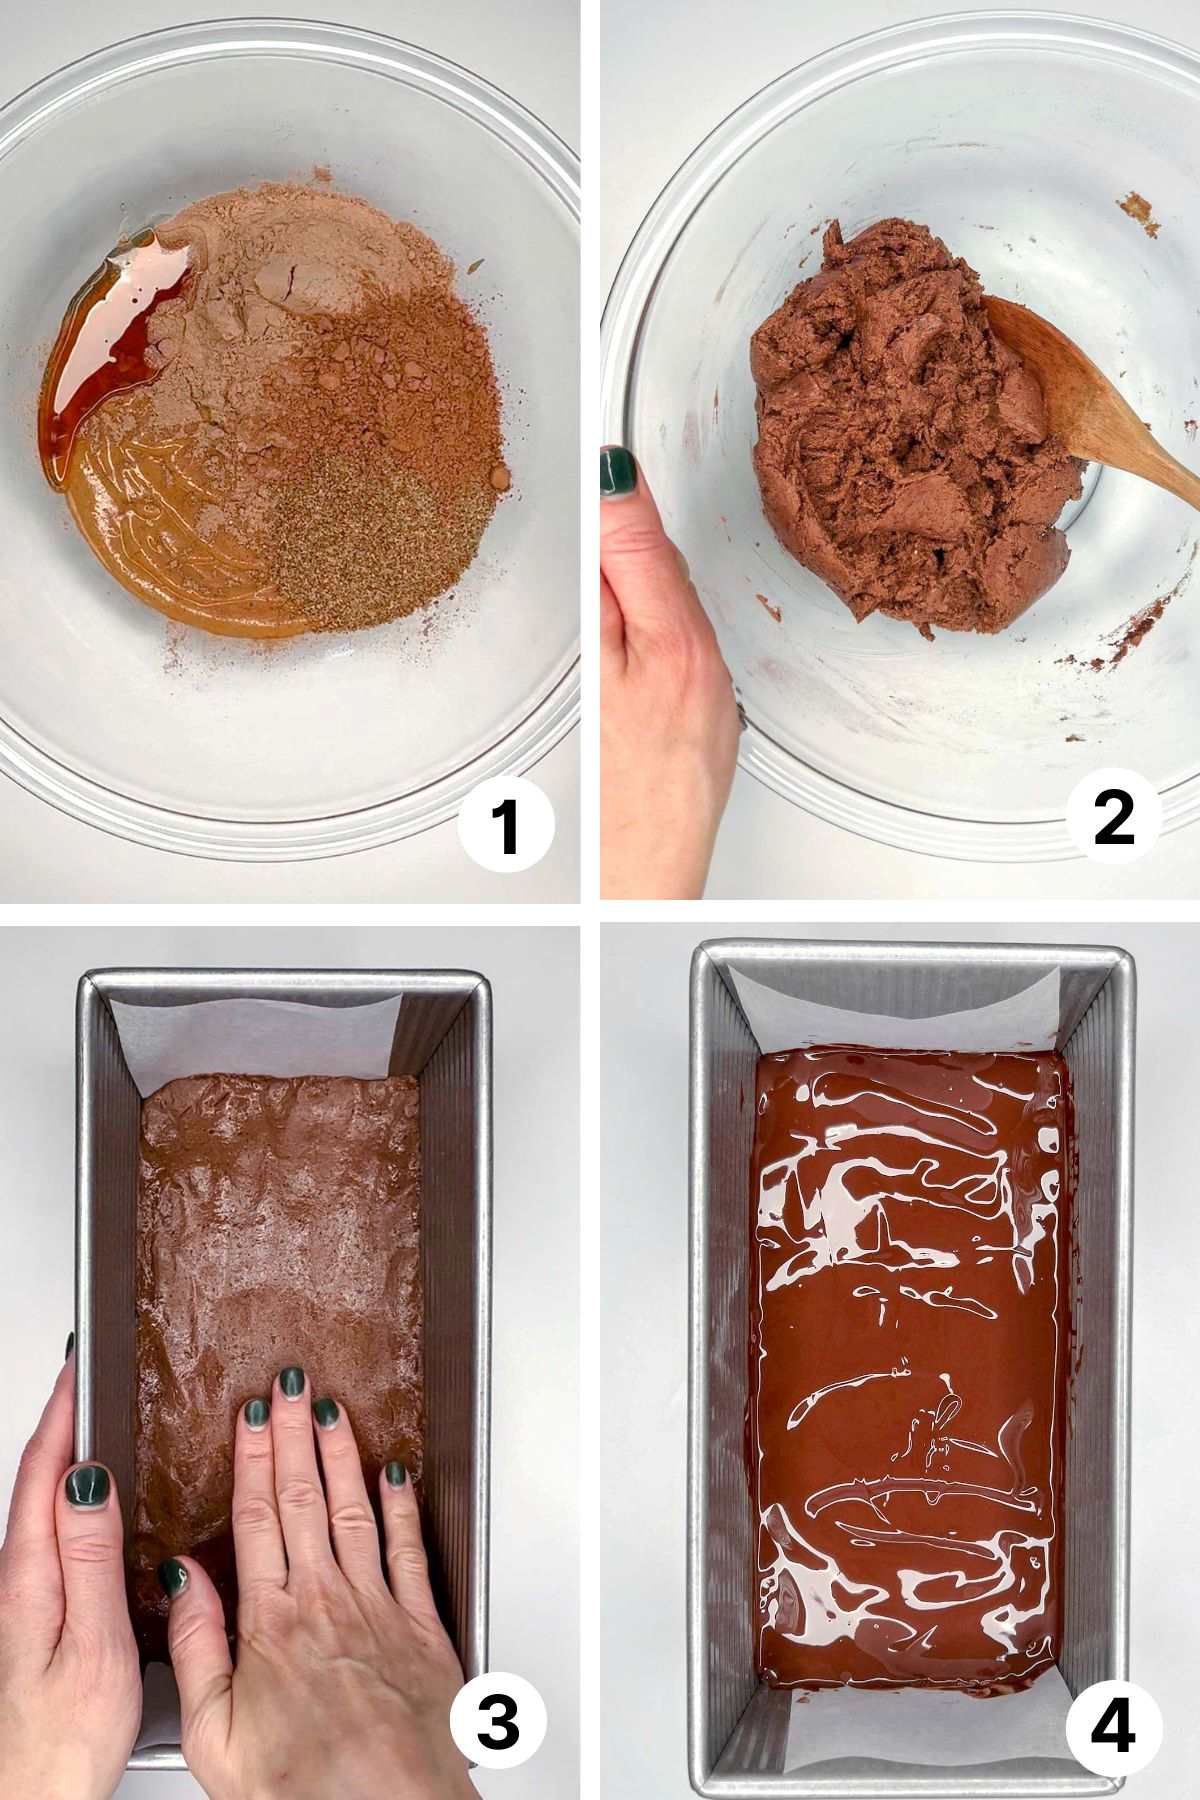 Quadrants showing process shots for making protein bar "dough," adding to loaf pan, and covering with chocolate.